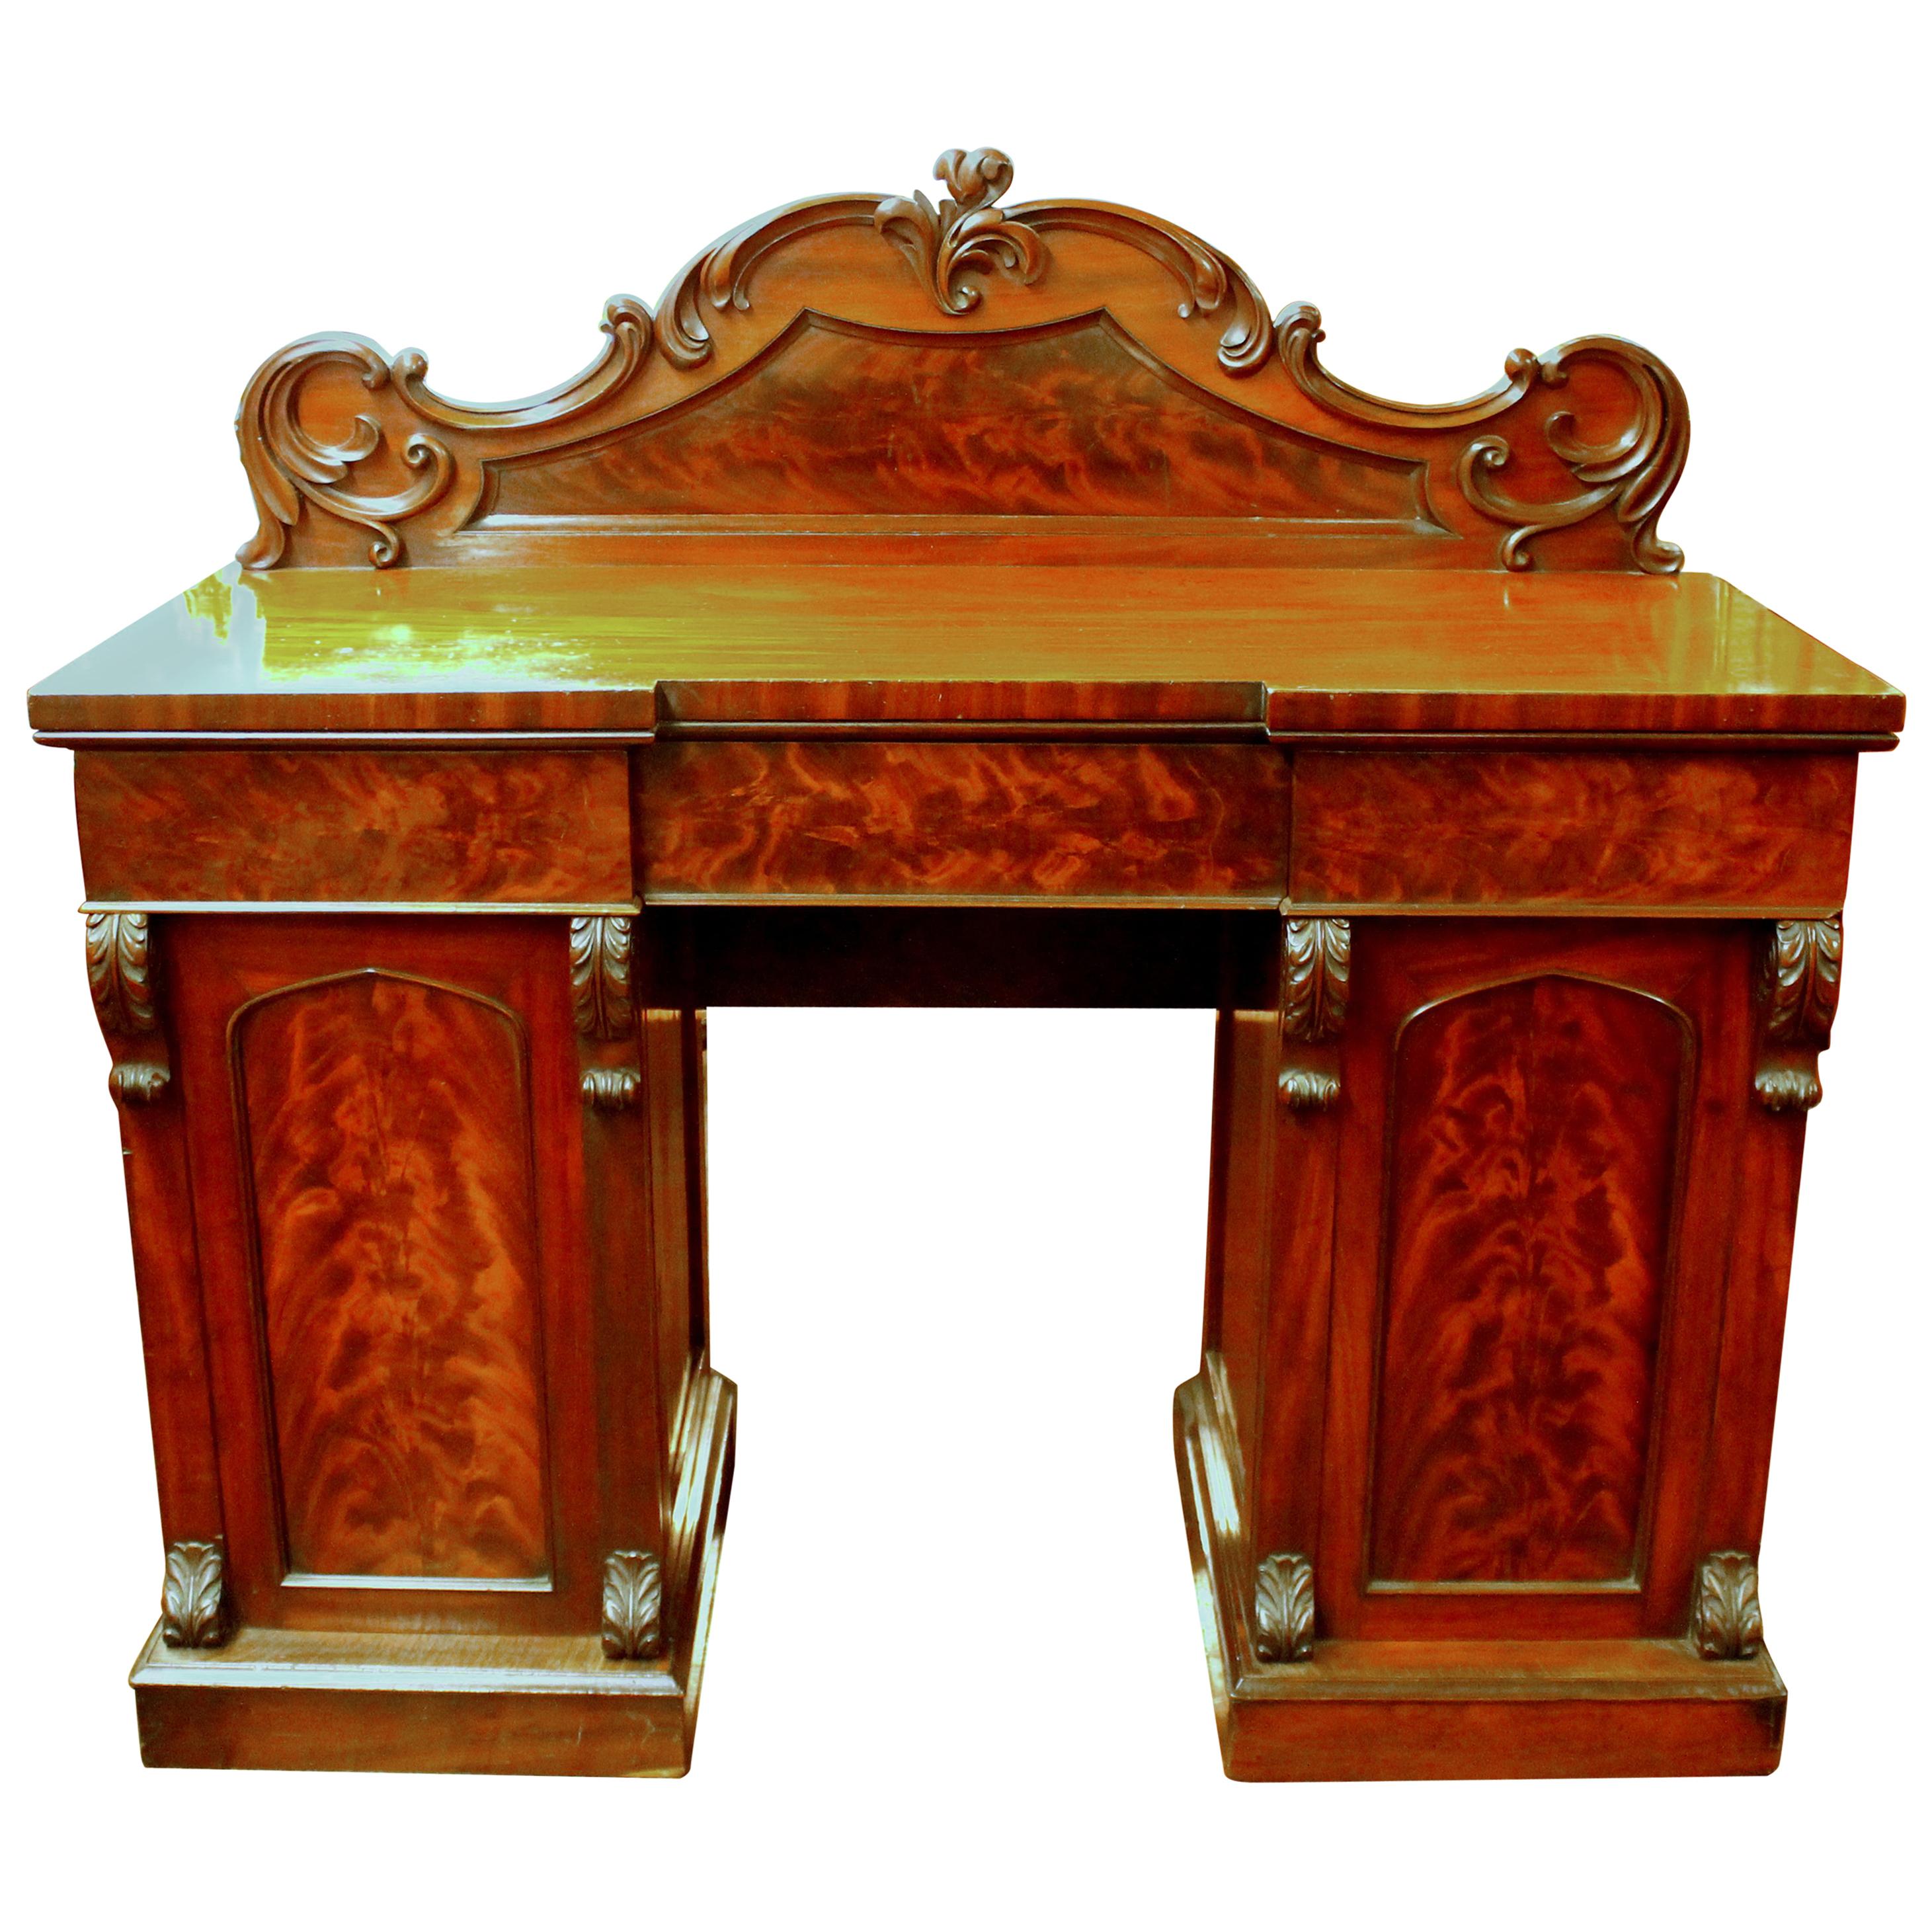 Antique English Book-Matched Flame Mahogany Victorian Sideboard